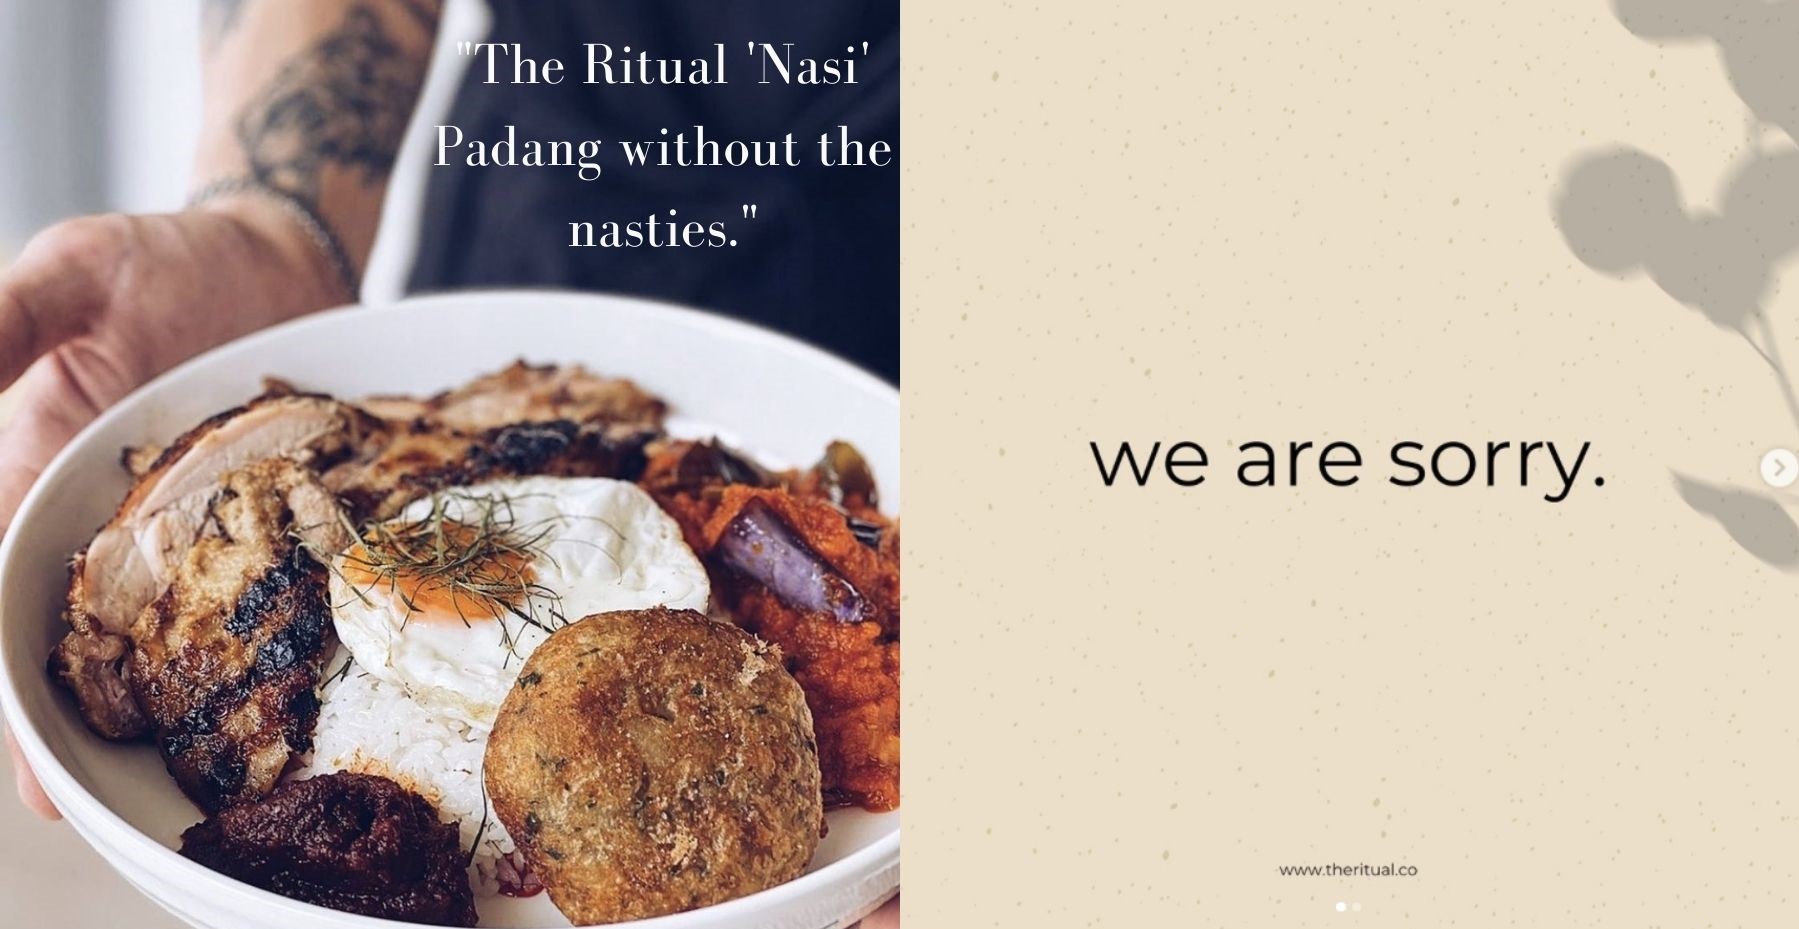 The cafe had marketed their healthy version of Nasi Padang as “without the nasties”.